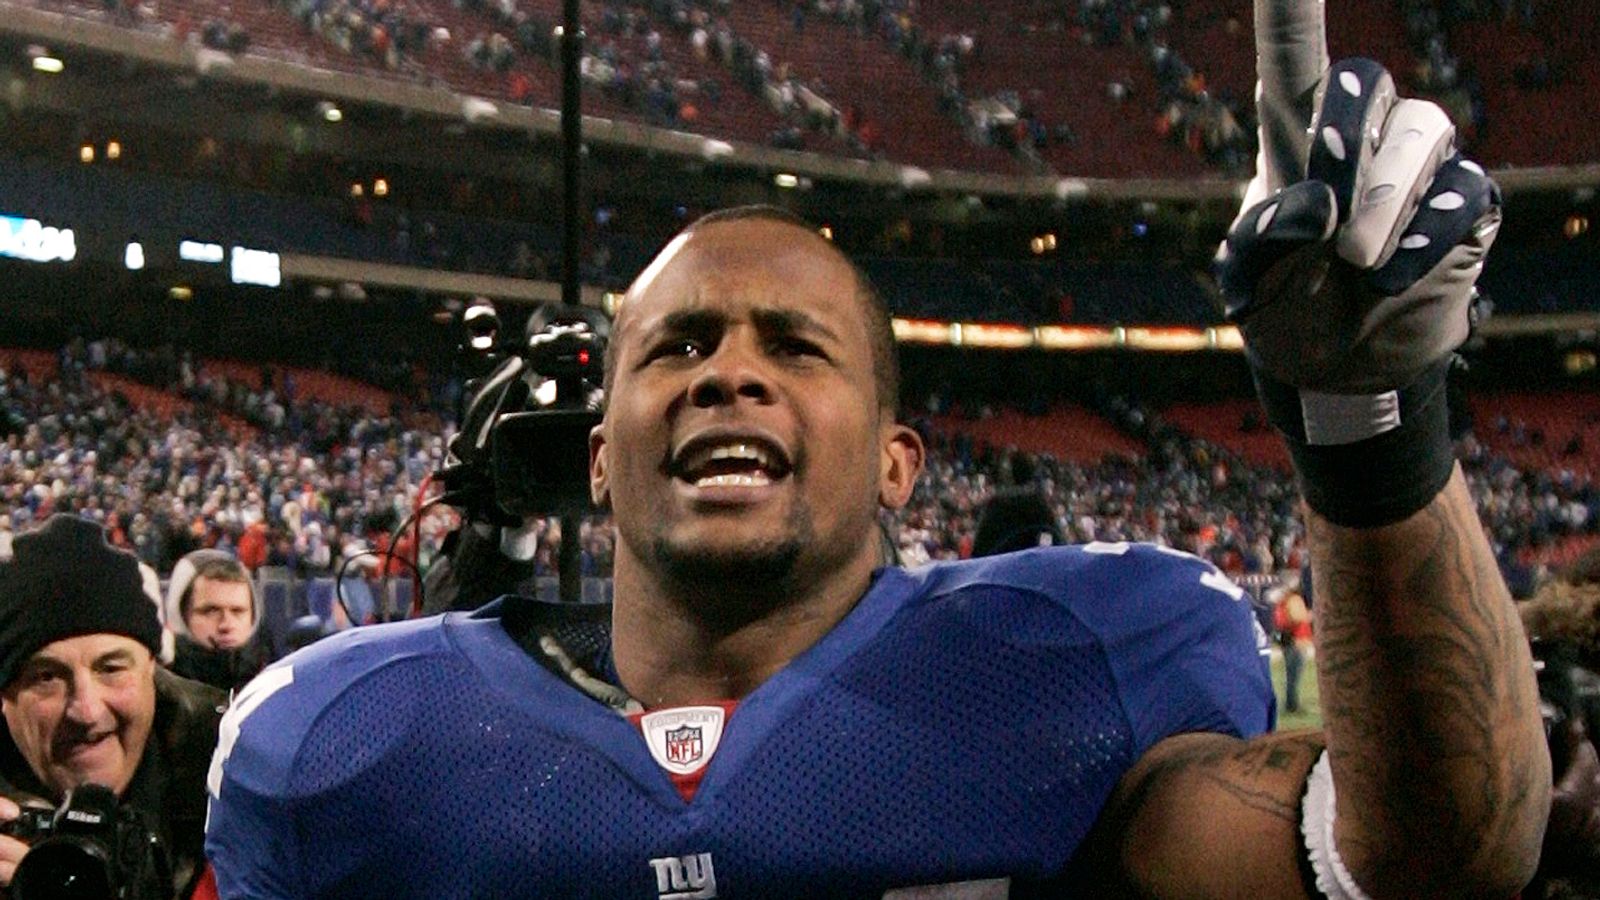 BREAKING : Super Bowl Winner Derrick Ward Arrested in Los Angeles On Charges Of Several Robberies